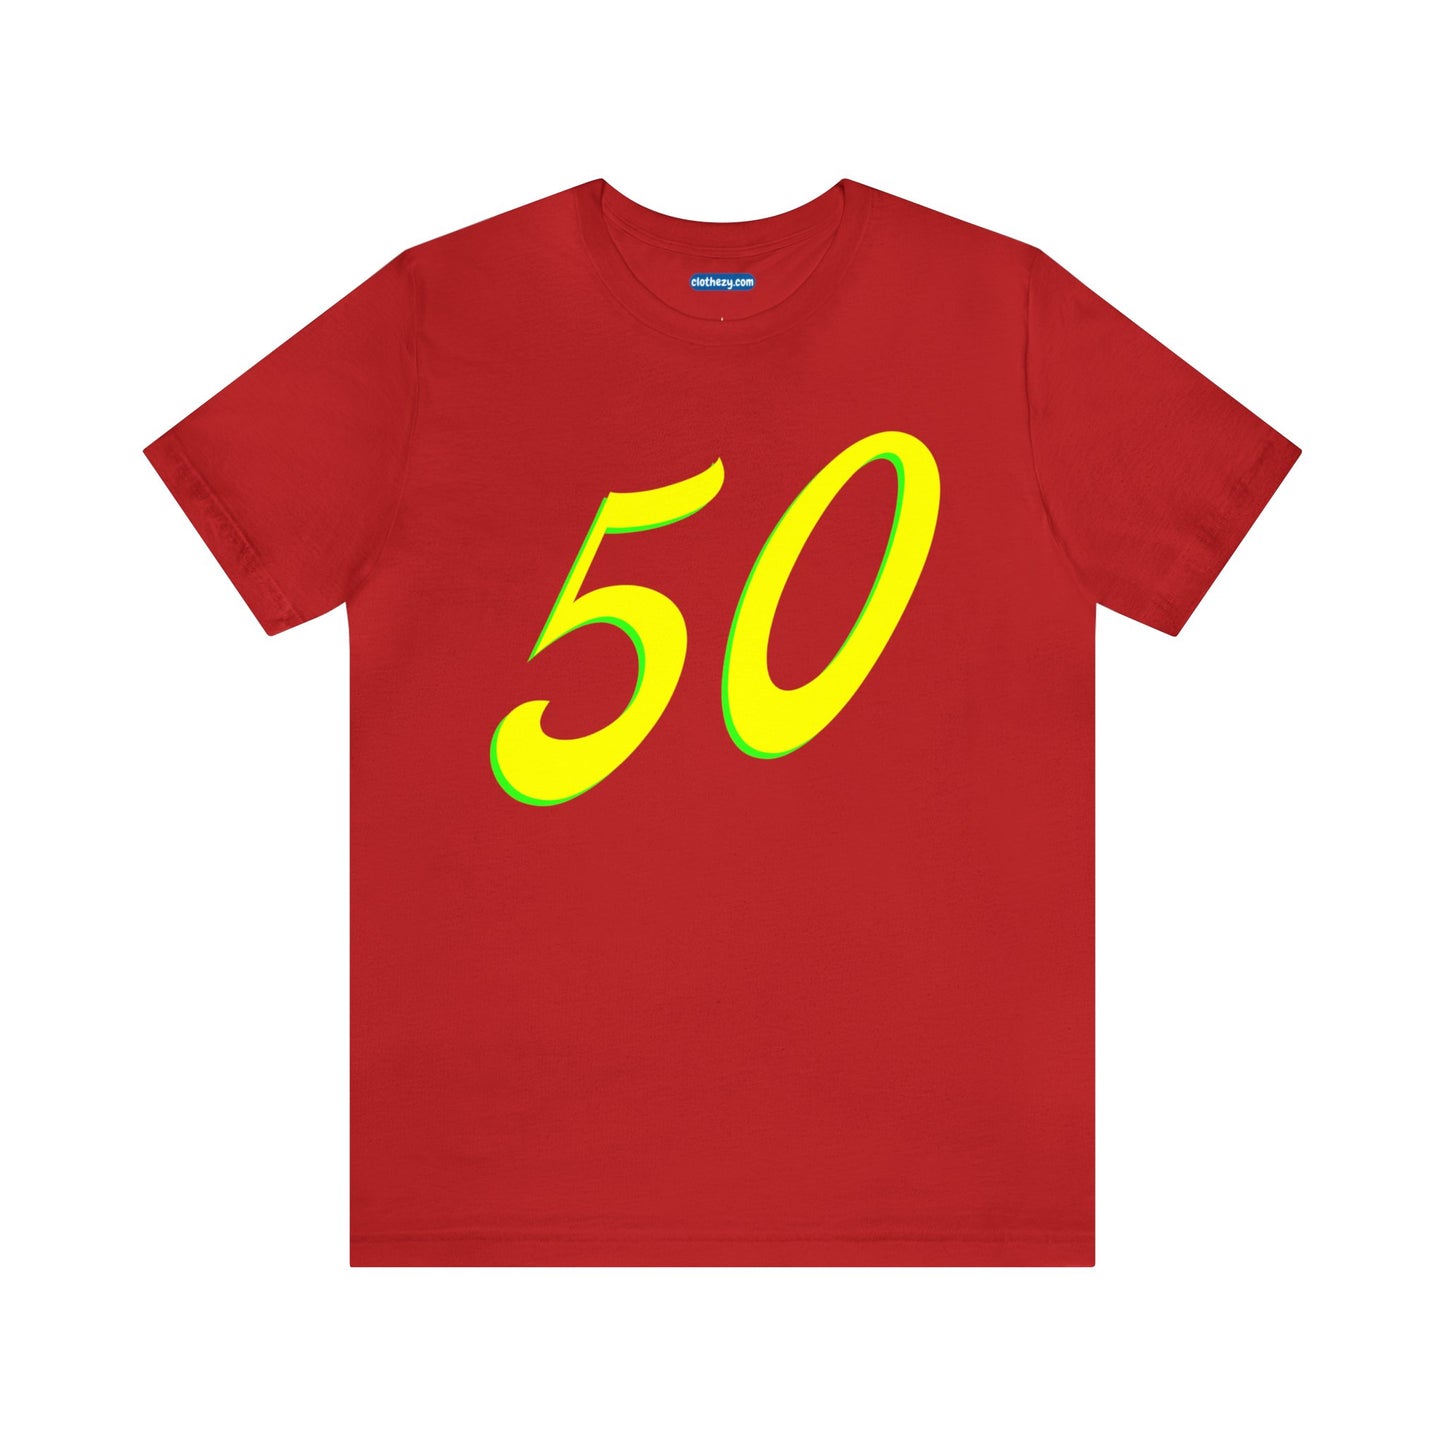 Number 50 Design - Soft Cotton Tee for birthdays and celebrations, Gift for friends and family, Multiple Options by clothezy.com in Red Size Small - Buy Now